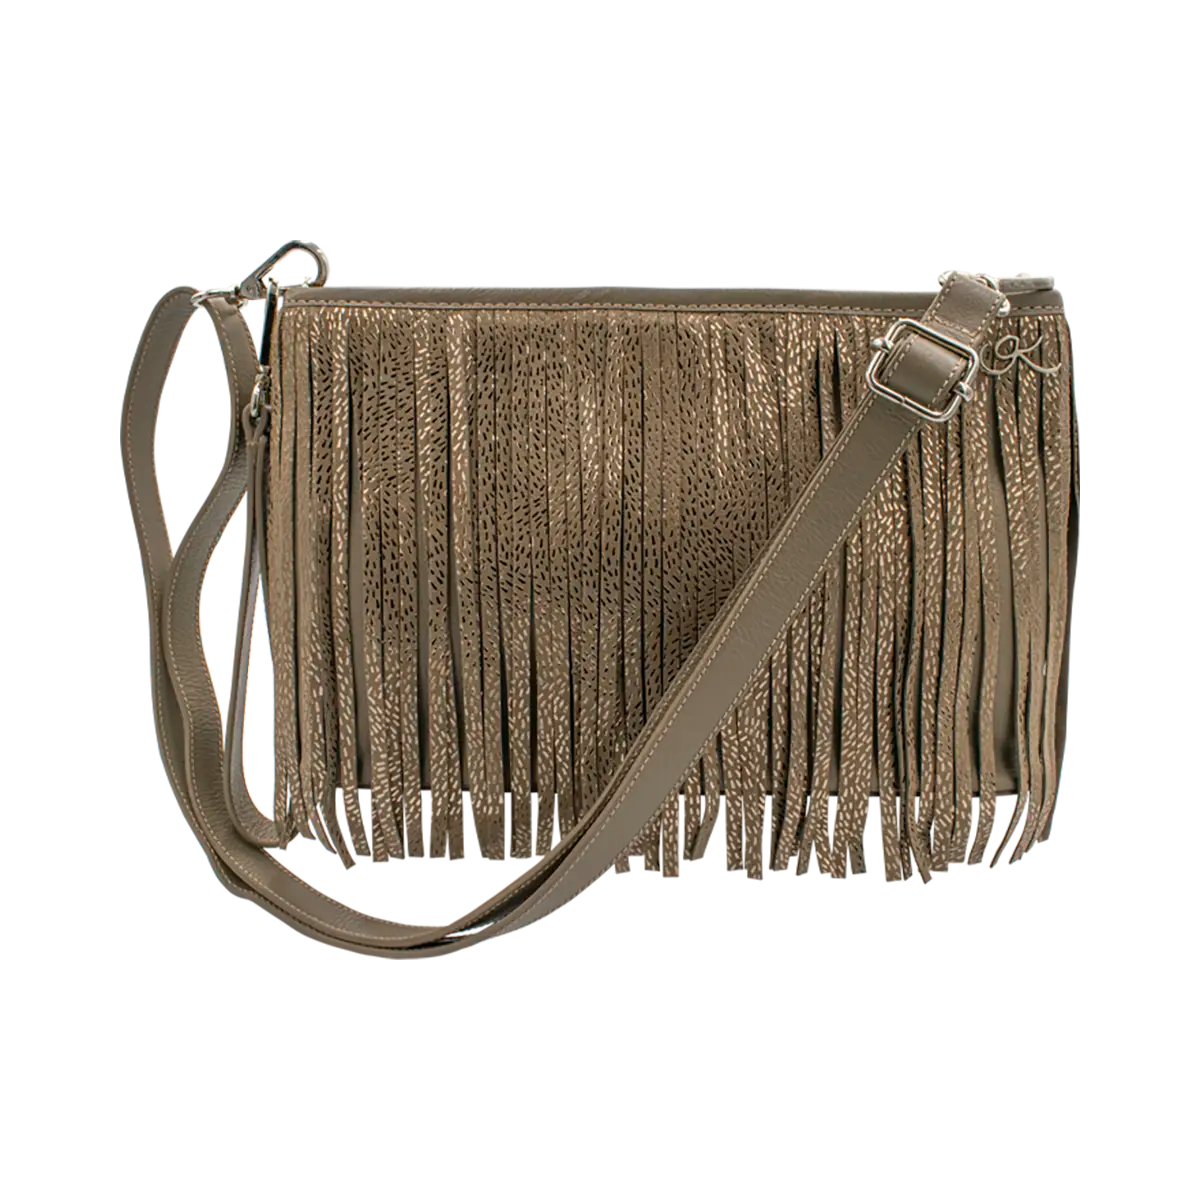 tan stripe small black leather crossbody bag with fringe. Fashion accessory for women in San Diego, CA.